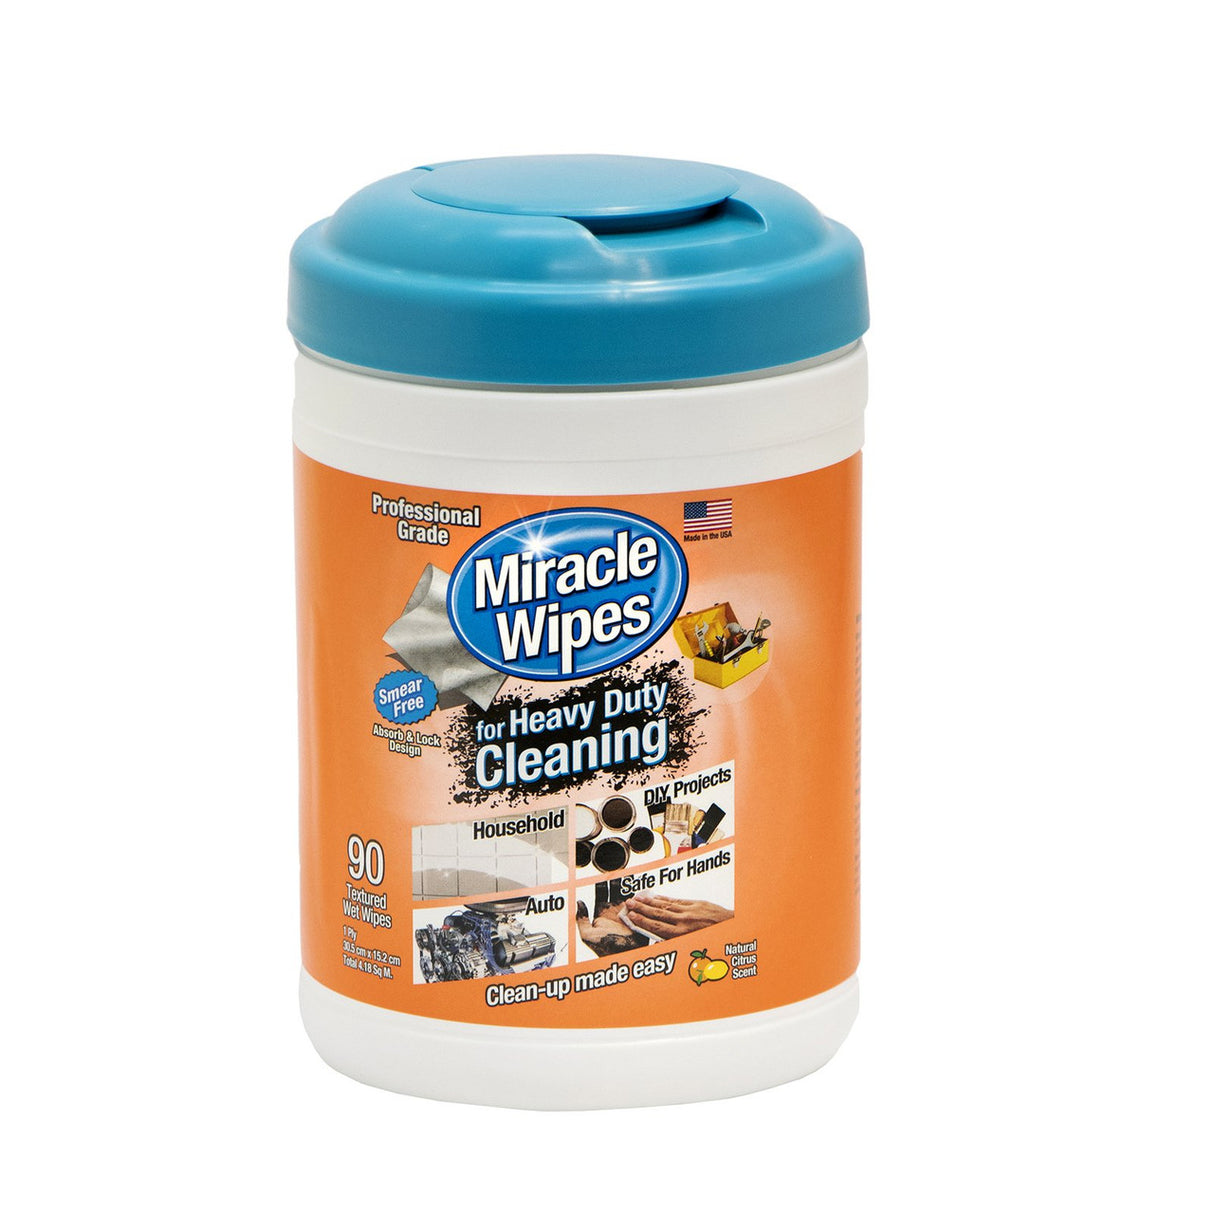 Miracle Wipes for Heavy Duty Cleaning